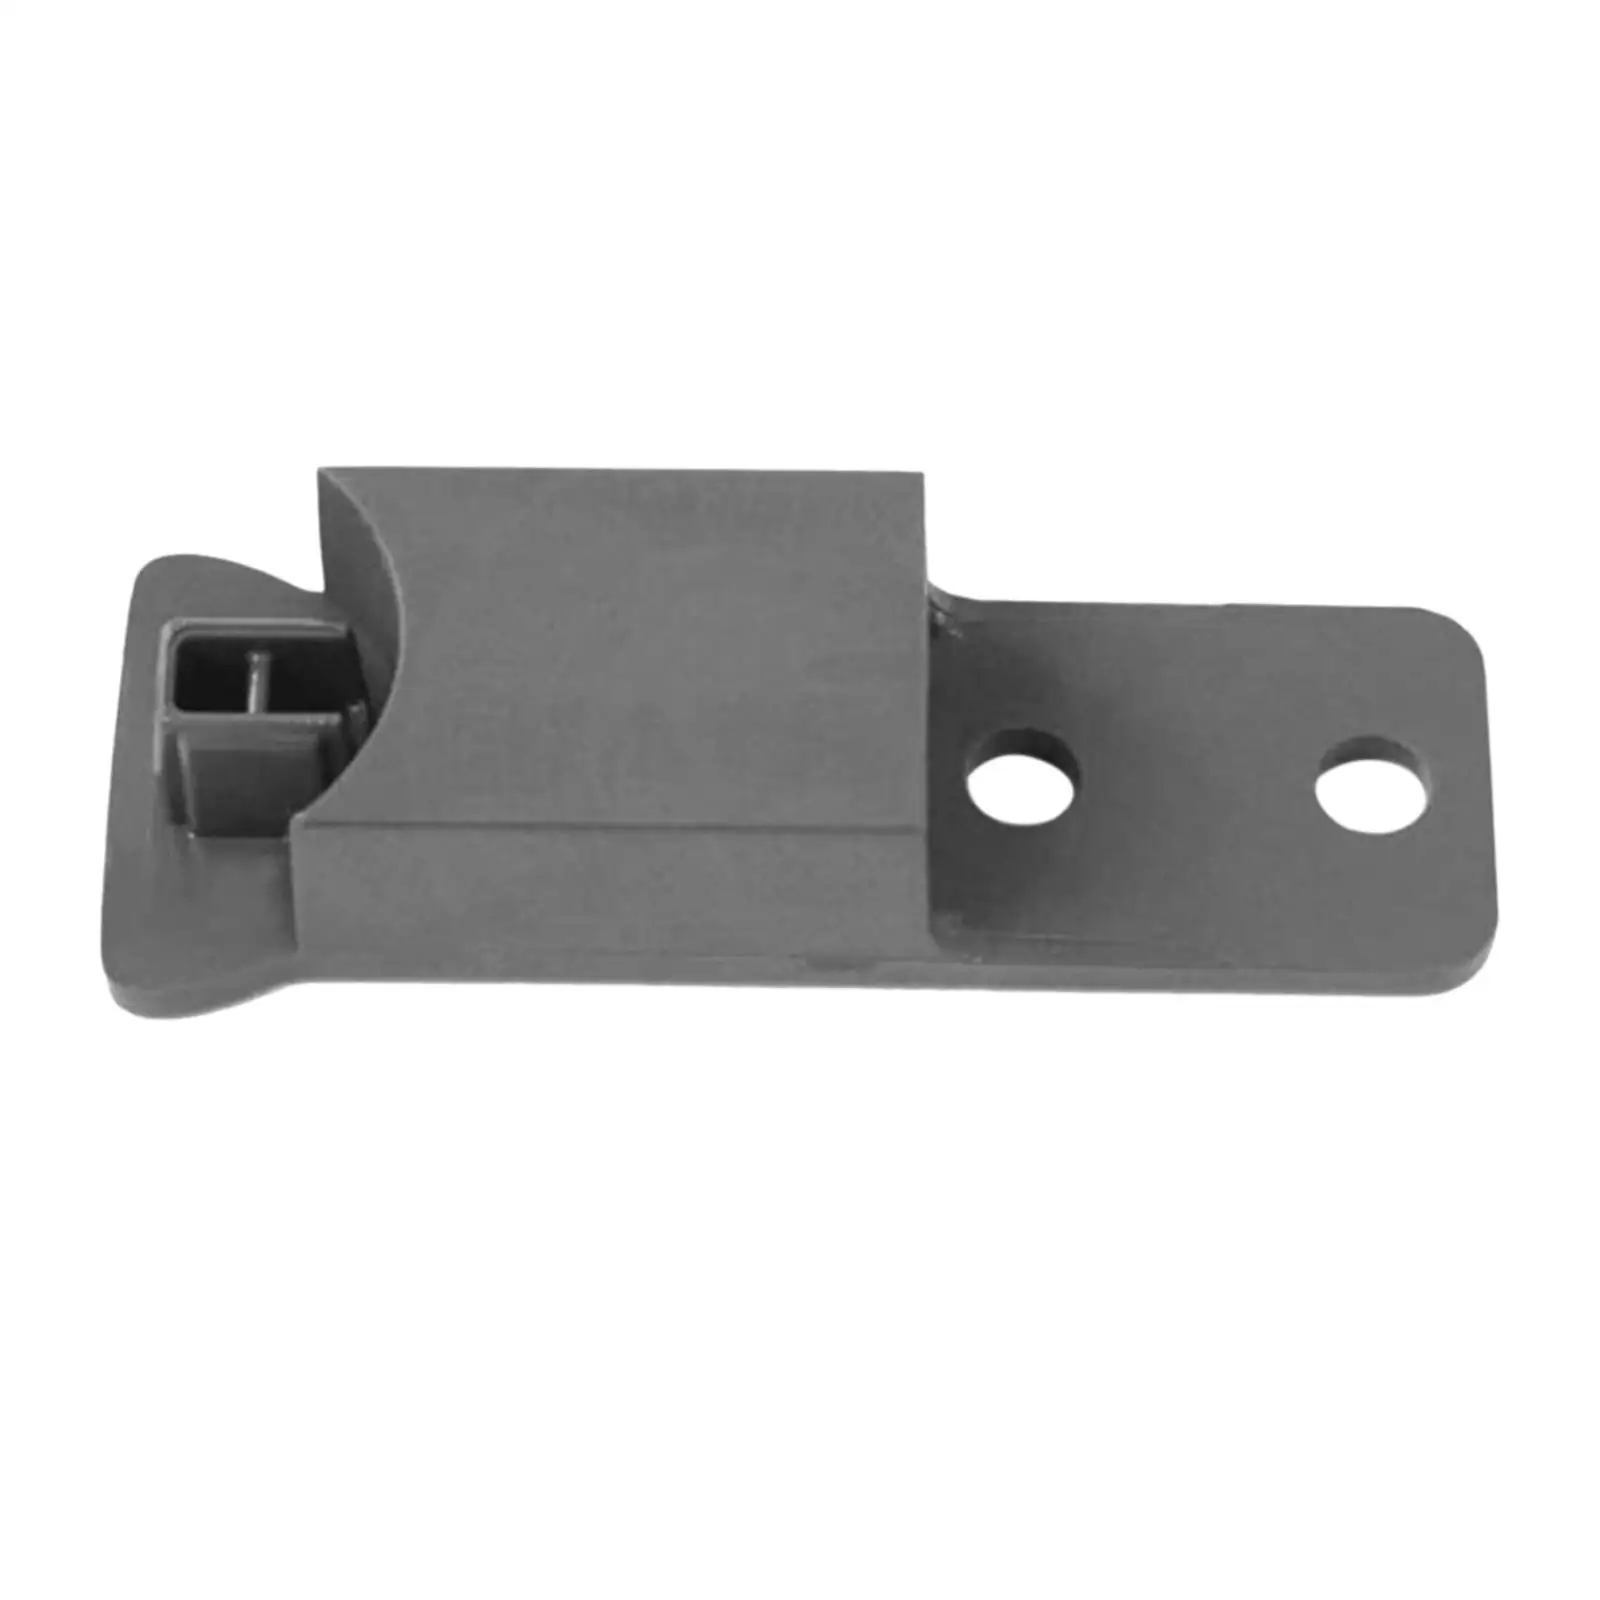 Handle End Cap Replaces Accessories Appliance Cap W10917049 AP6036240 W10838116 for Whirlpool Refrigerator